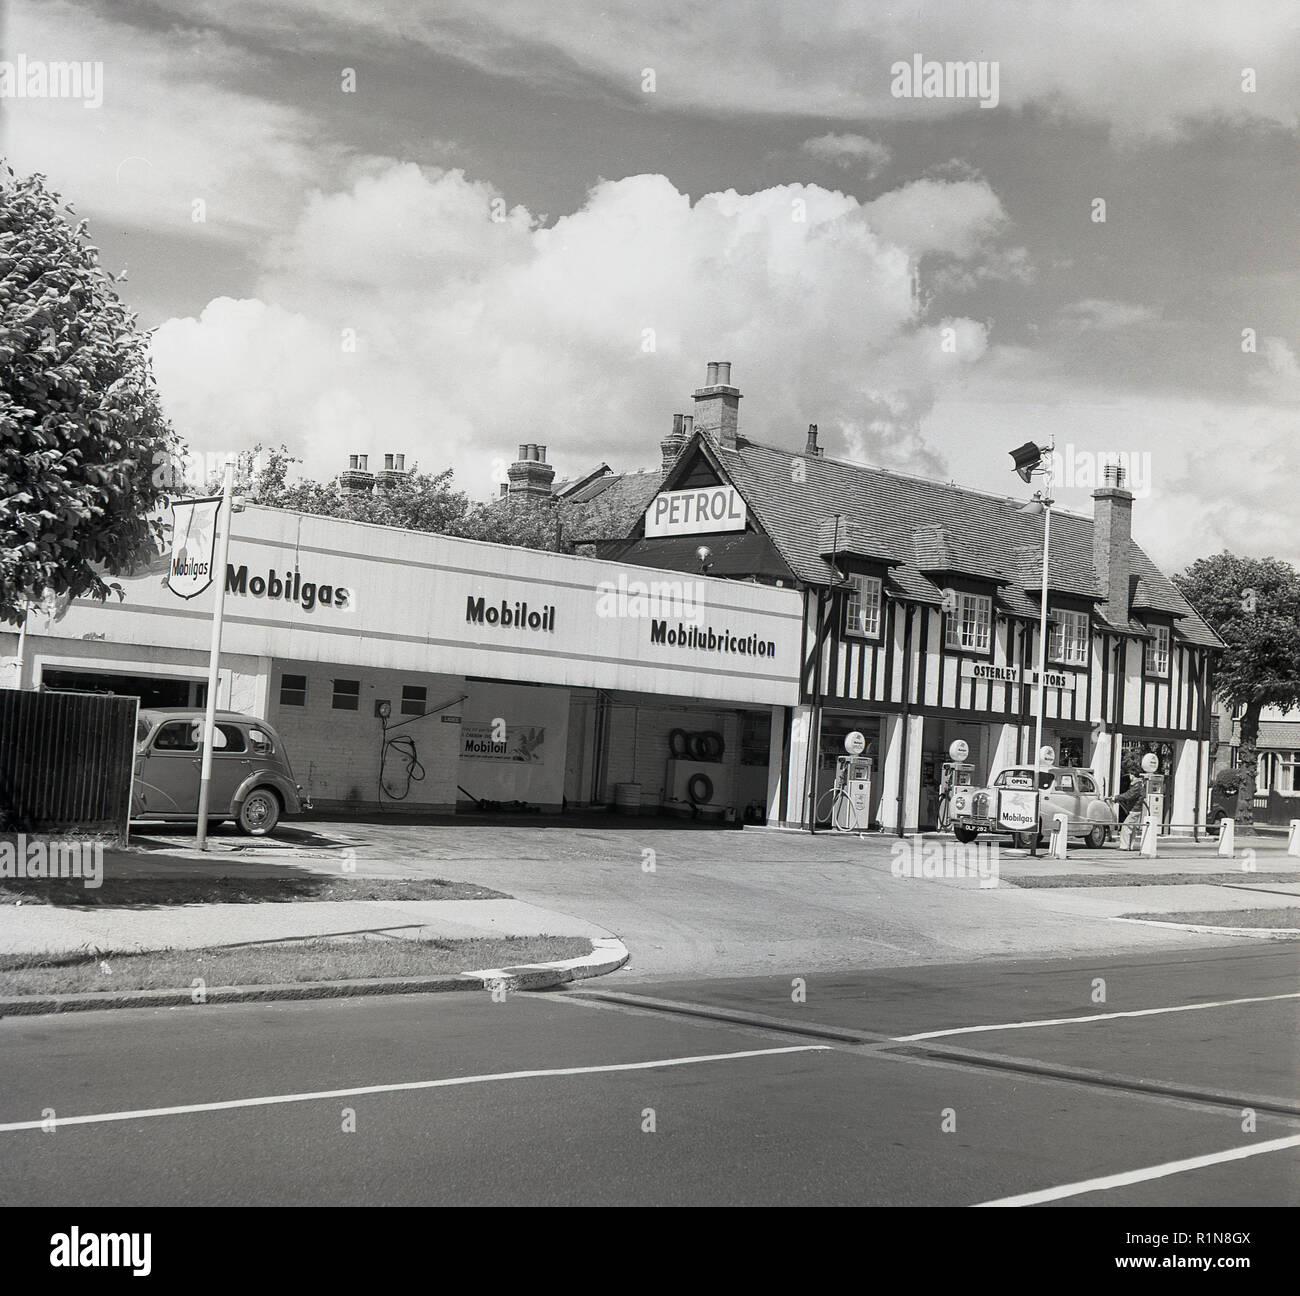 1950s, historical, exterior view of a a new Mobilegas service station, Osterley Motors, a garage and petrol station at Isleworth, London, England, UK. In post-war Britain as car ownership gradually increased, larger service stations - a filling station with fuel attendants and a repair garage combined - began to be visible on major roads such as this one on the A30 into London. Stock Photo